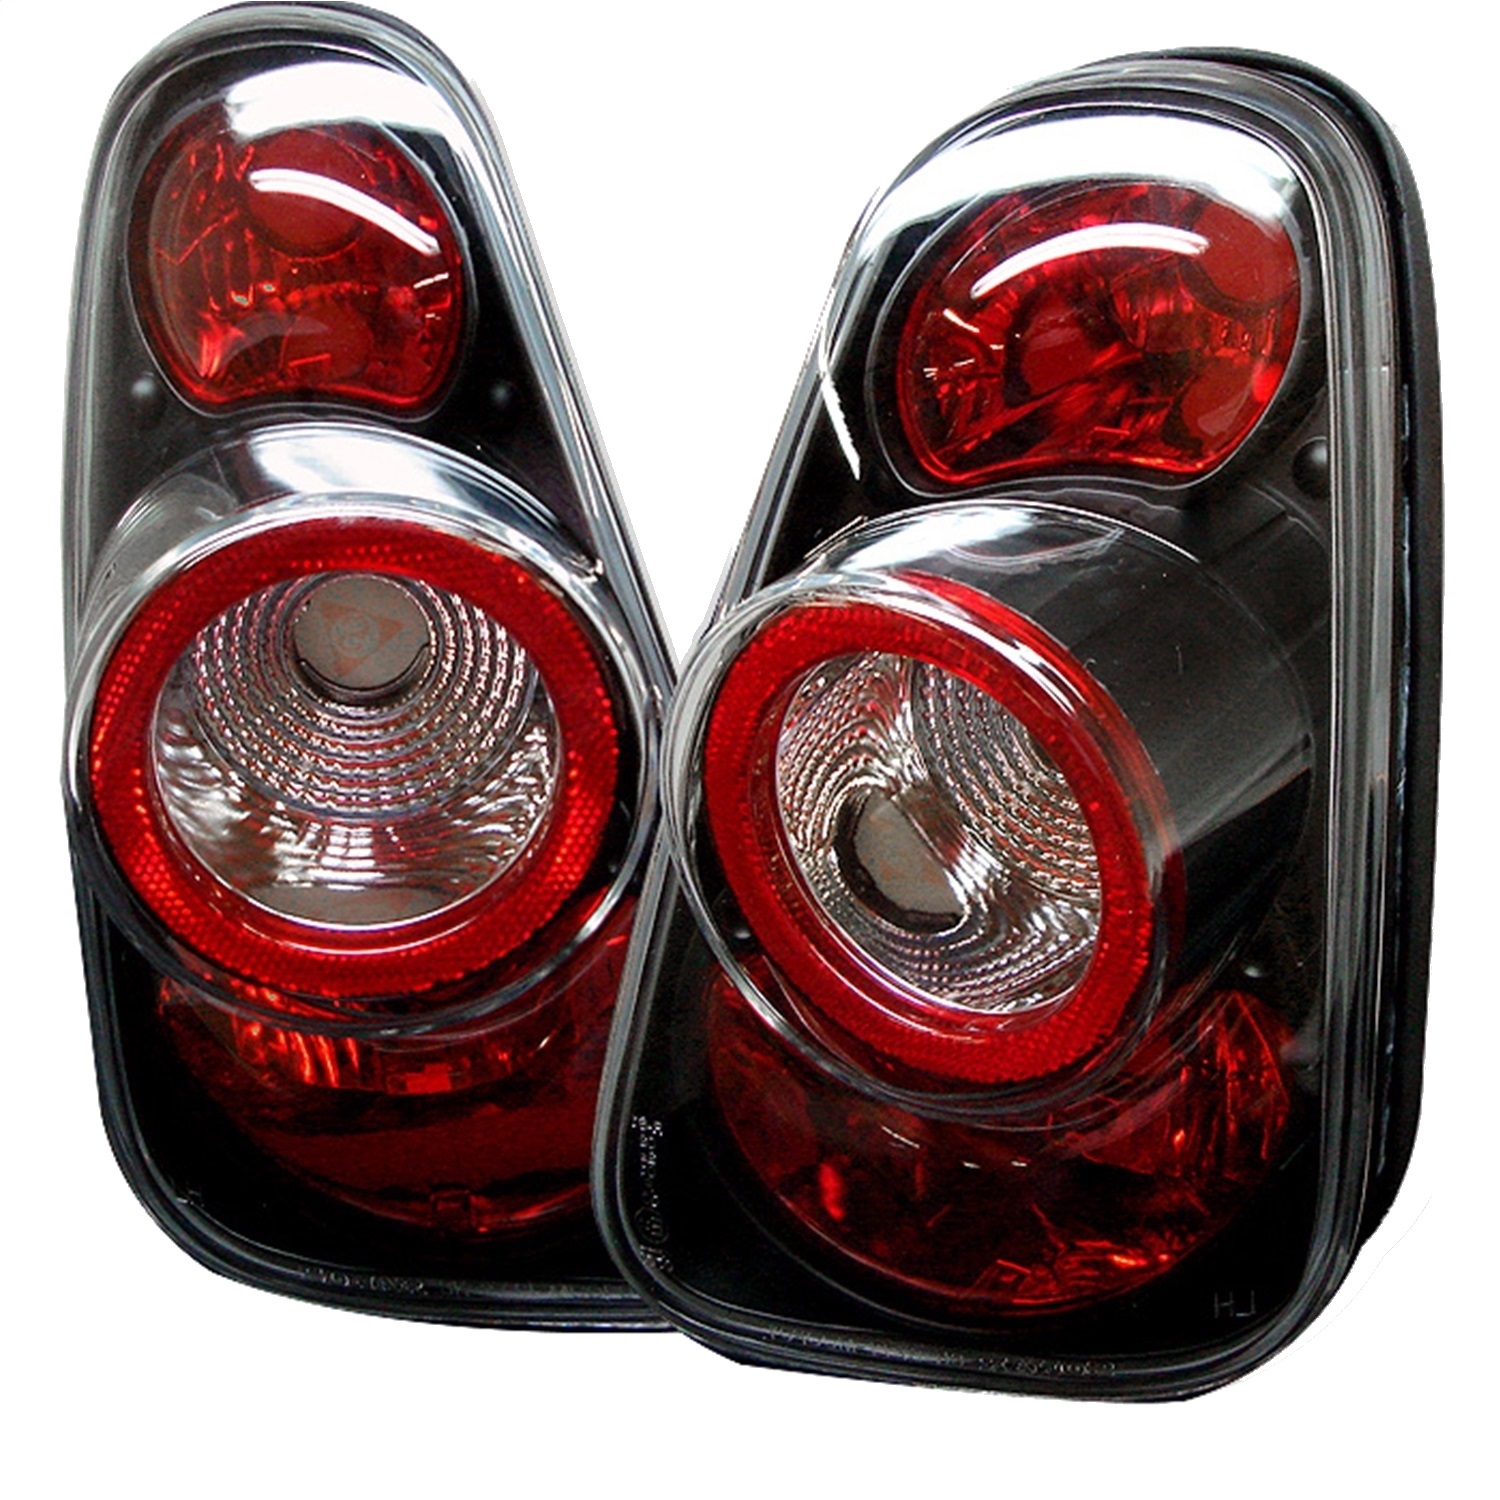 Spyder Auto 5006240 Euro Style Tail Lights Fits 02-06 Cooper